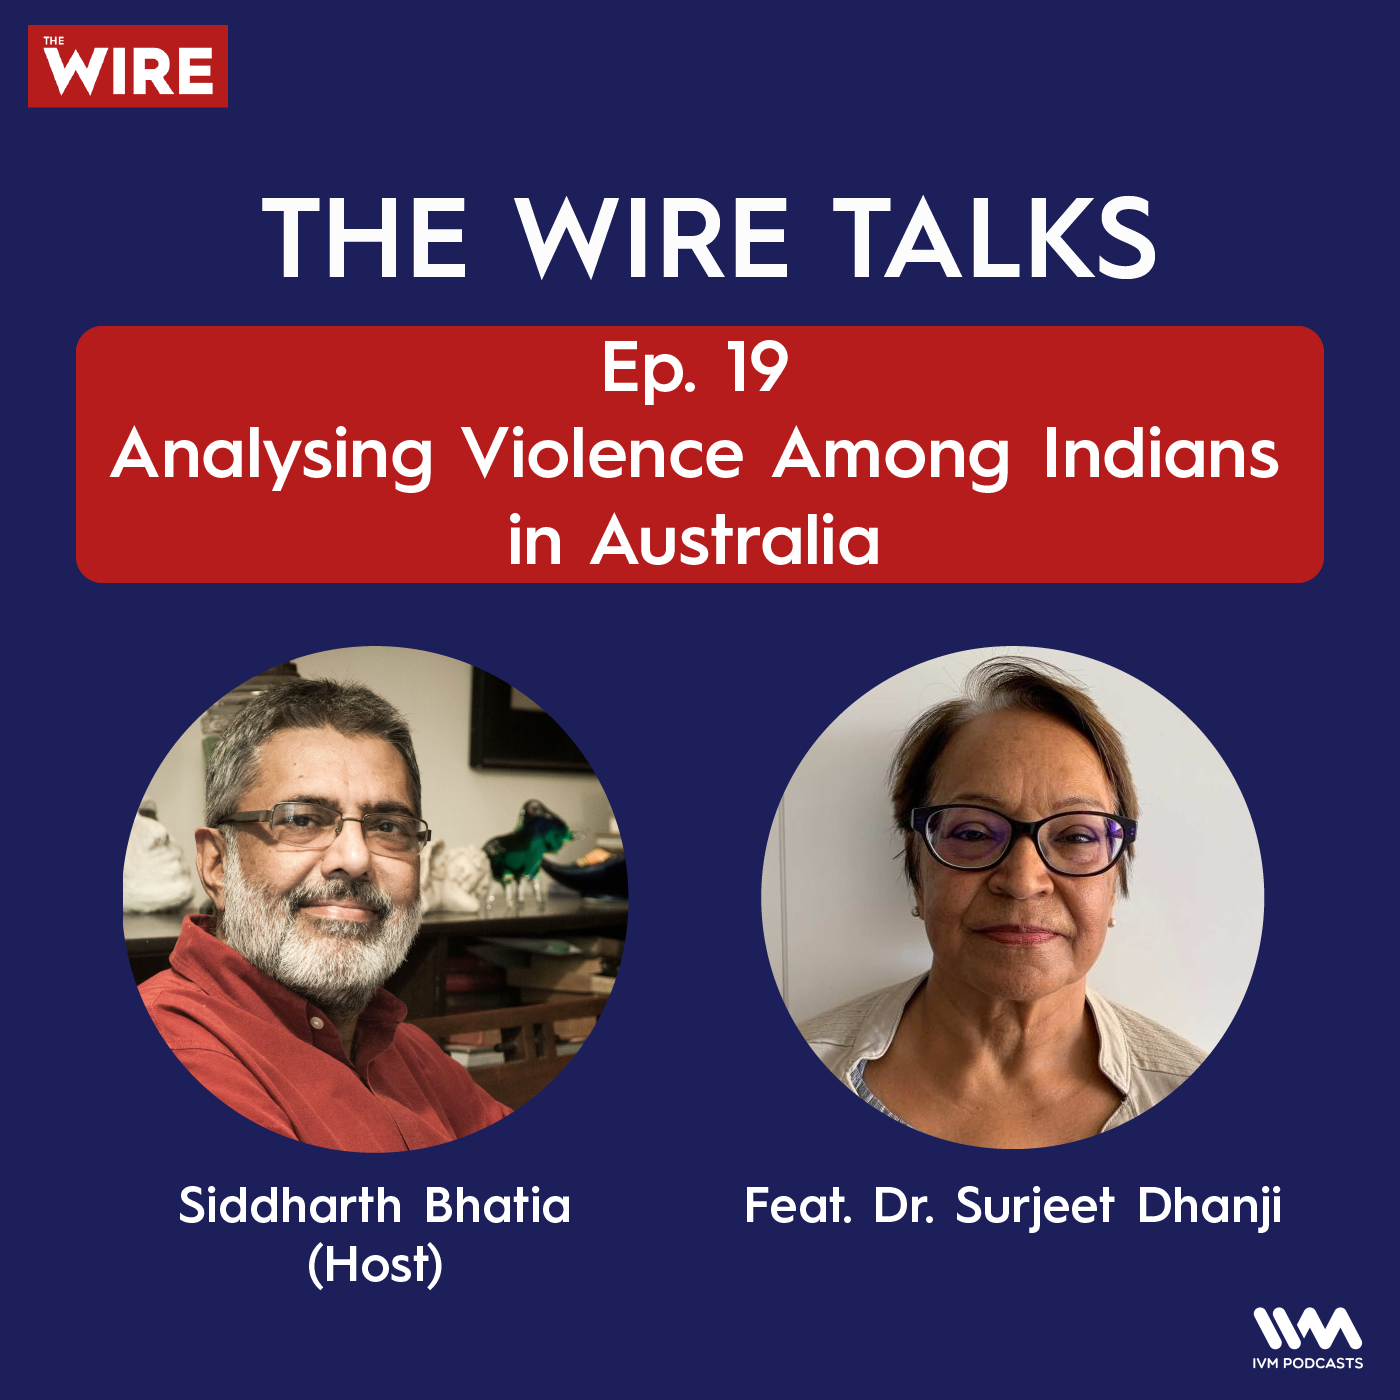 Analysing Violence Among Indians in Australia Feat. Dr. Surjeet Dhanji